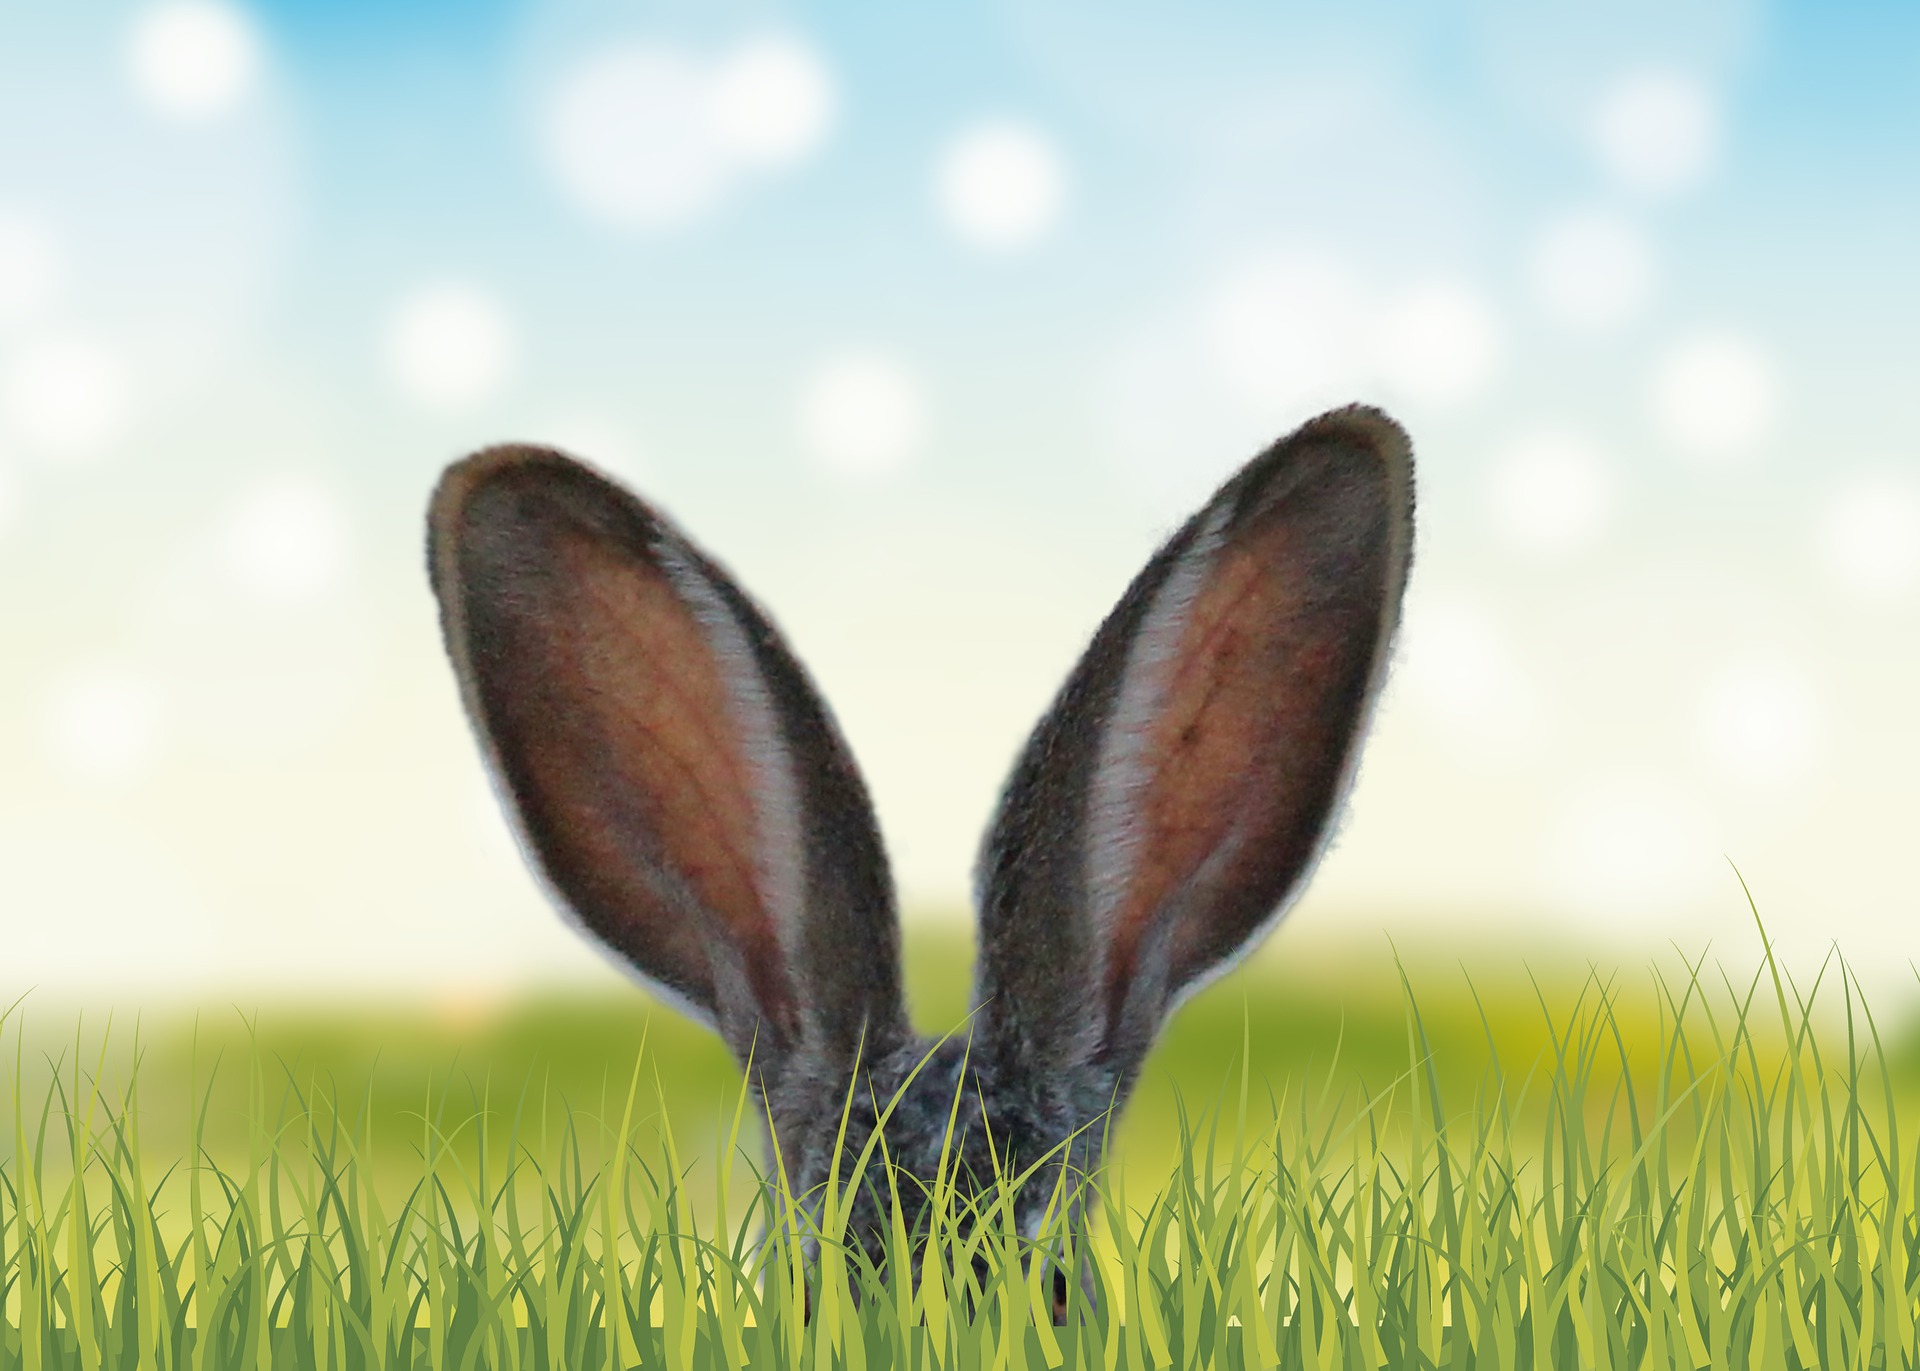 Rabbit Ears in the grass